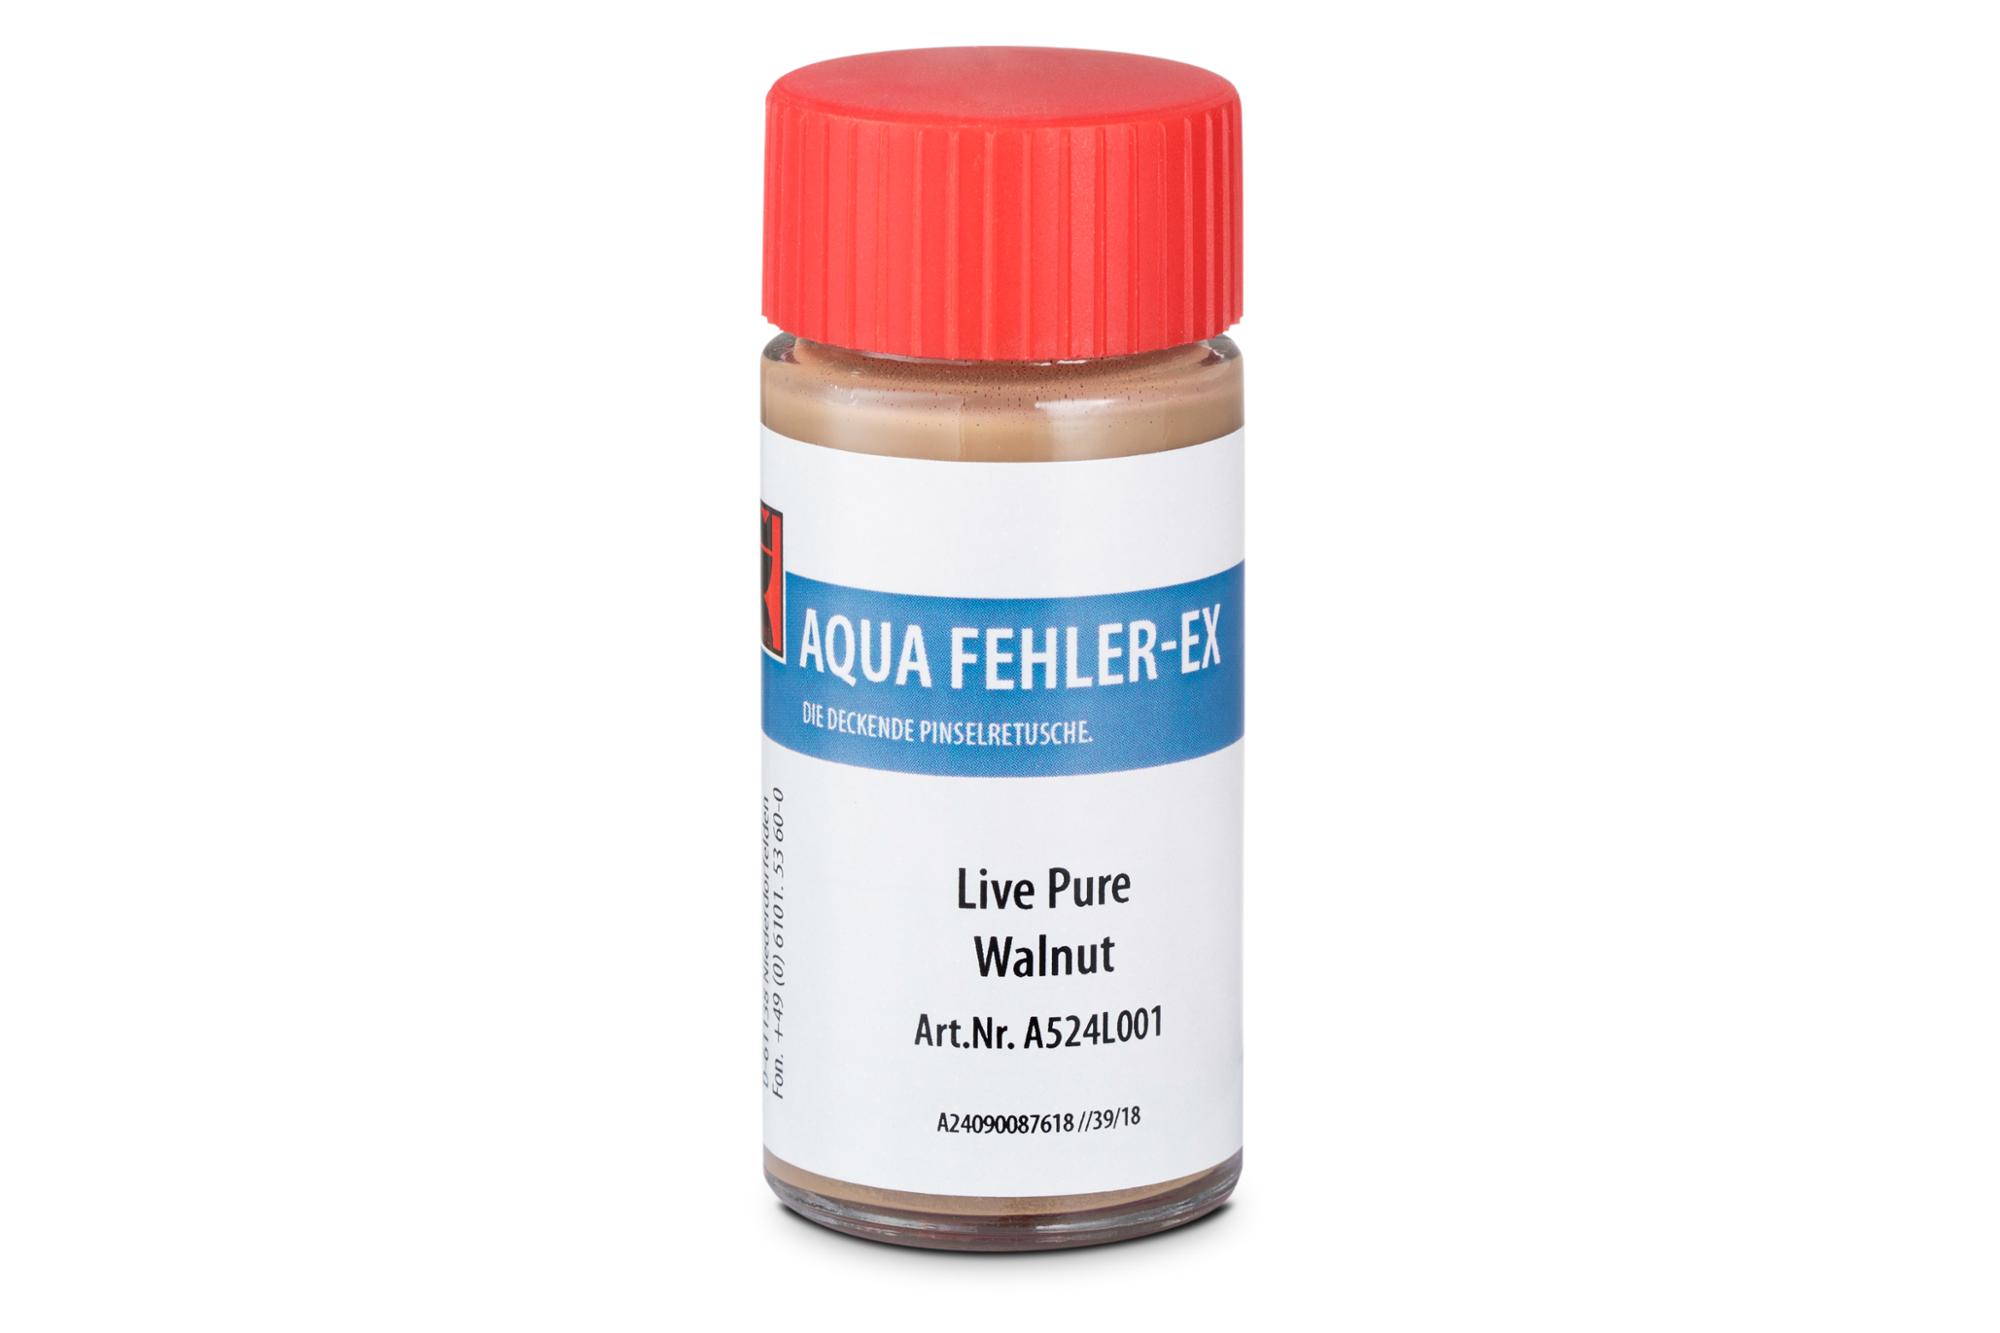 BOEN repair lacquer Live Pure
Walnut (28ml)
For the partial repair of Live Pure surfaces.
28ml water-based lacquer, bottle with small brush.